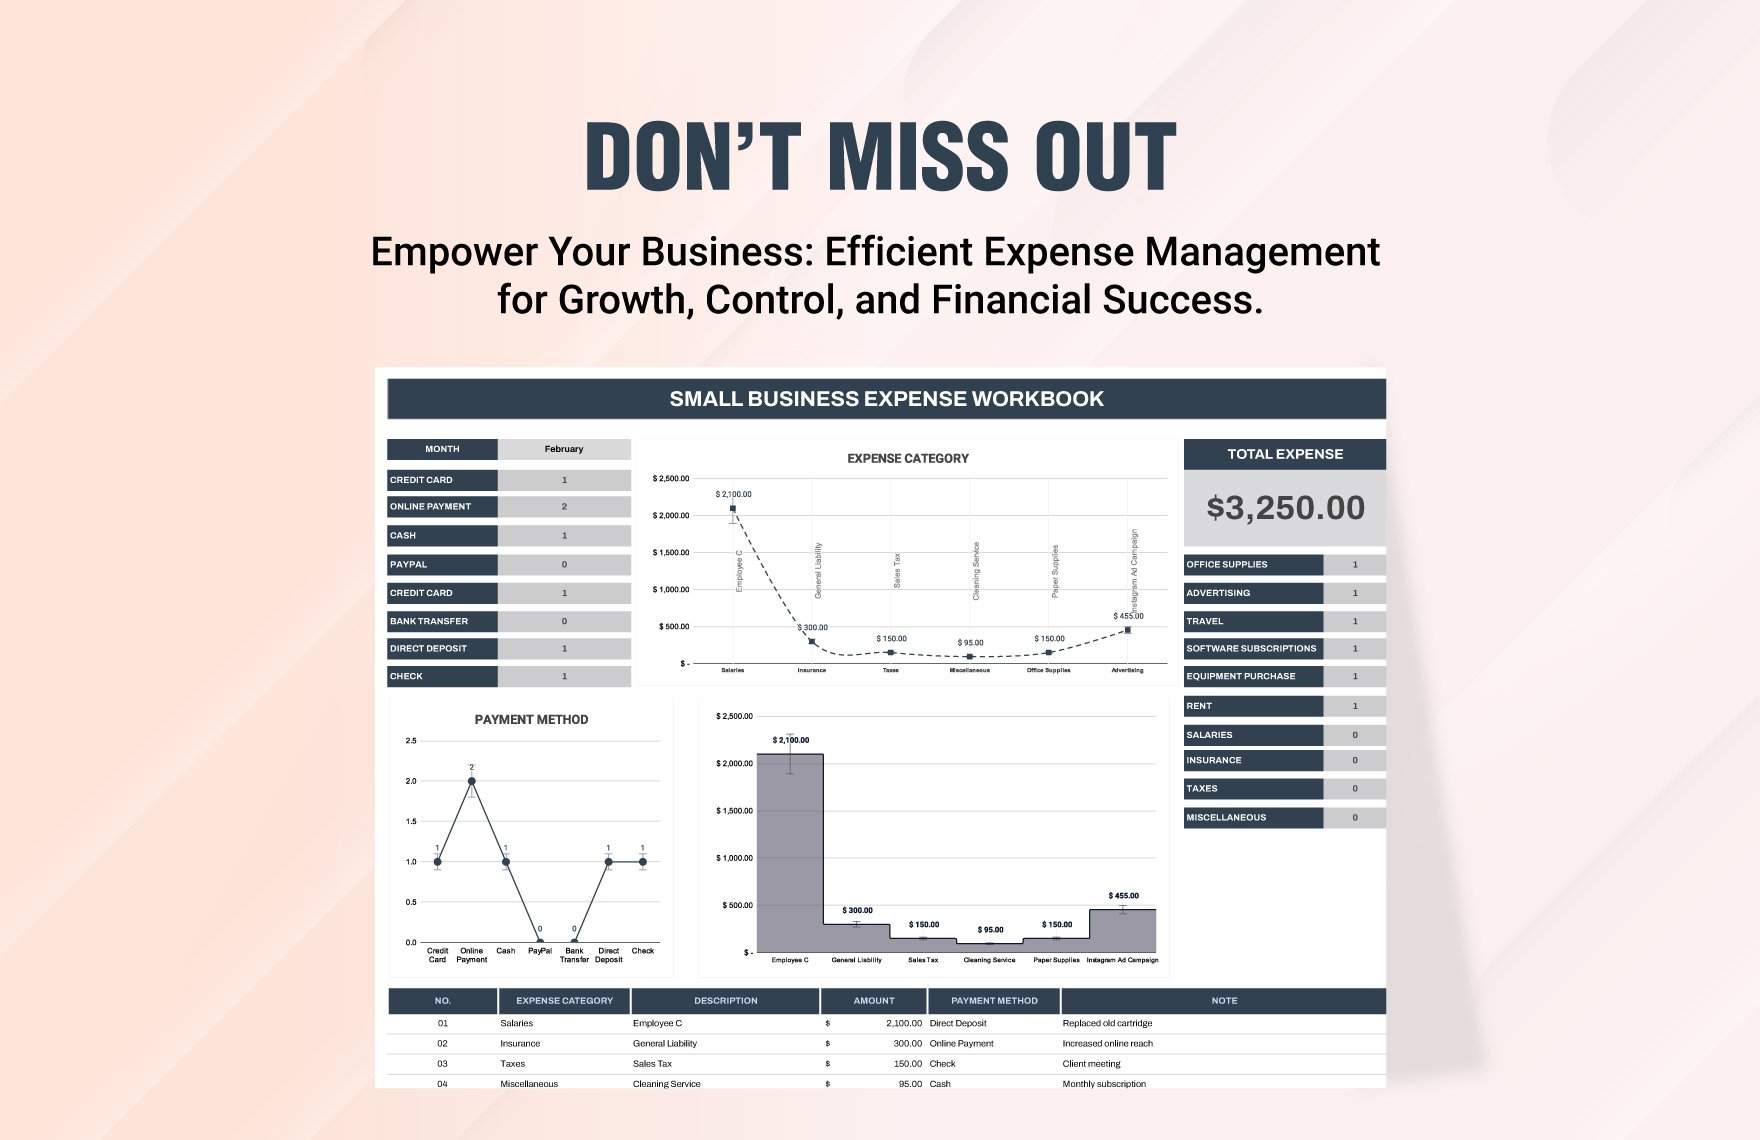 Small Business Expense Workbook Template